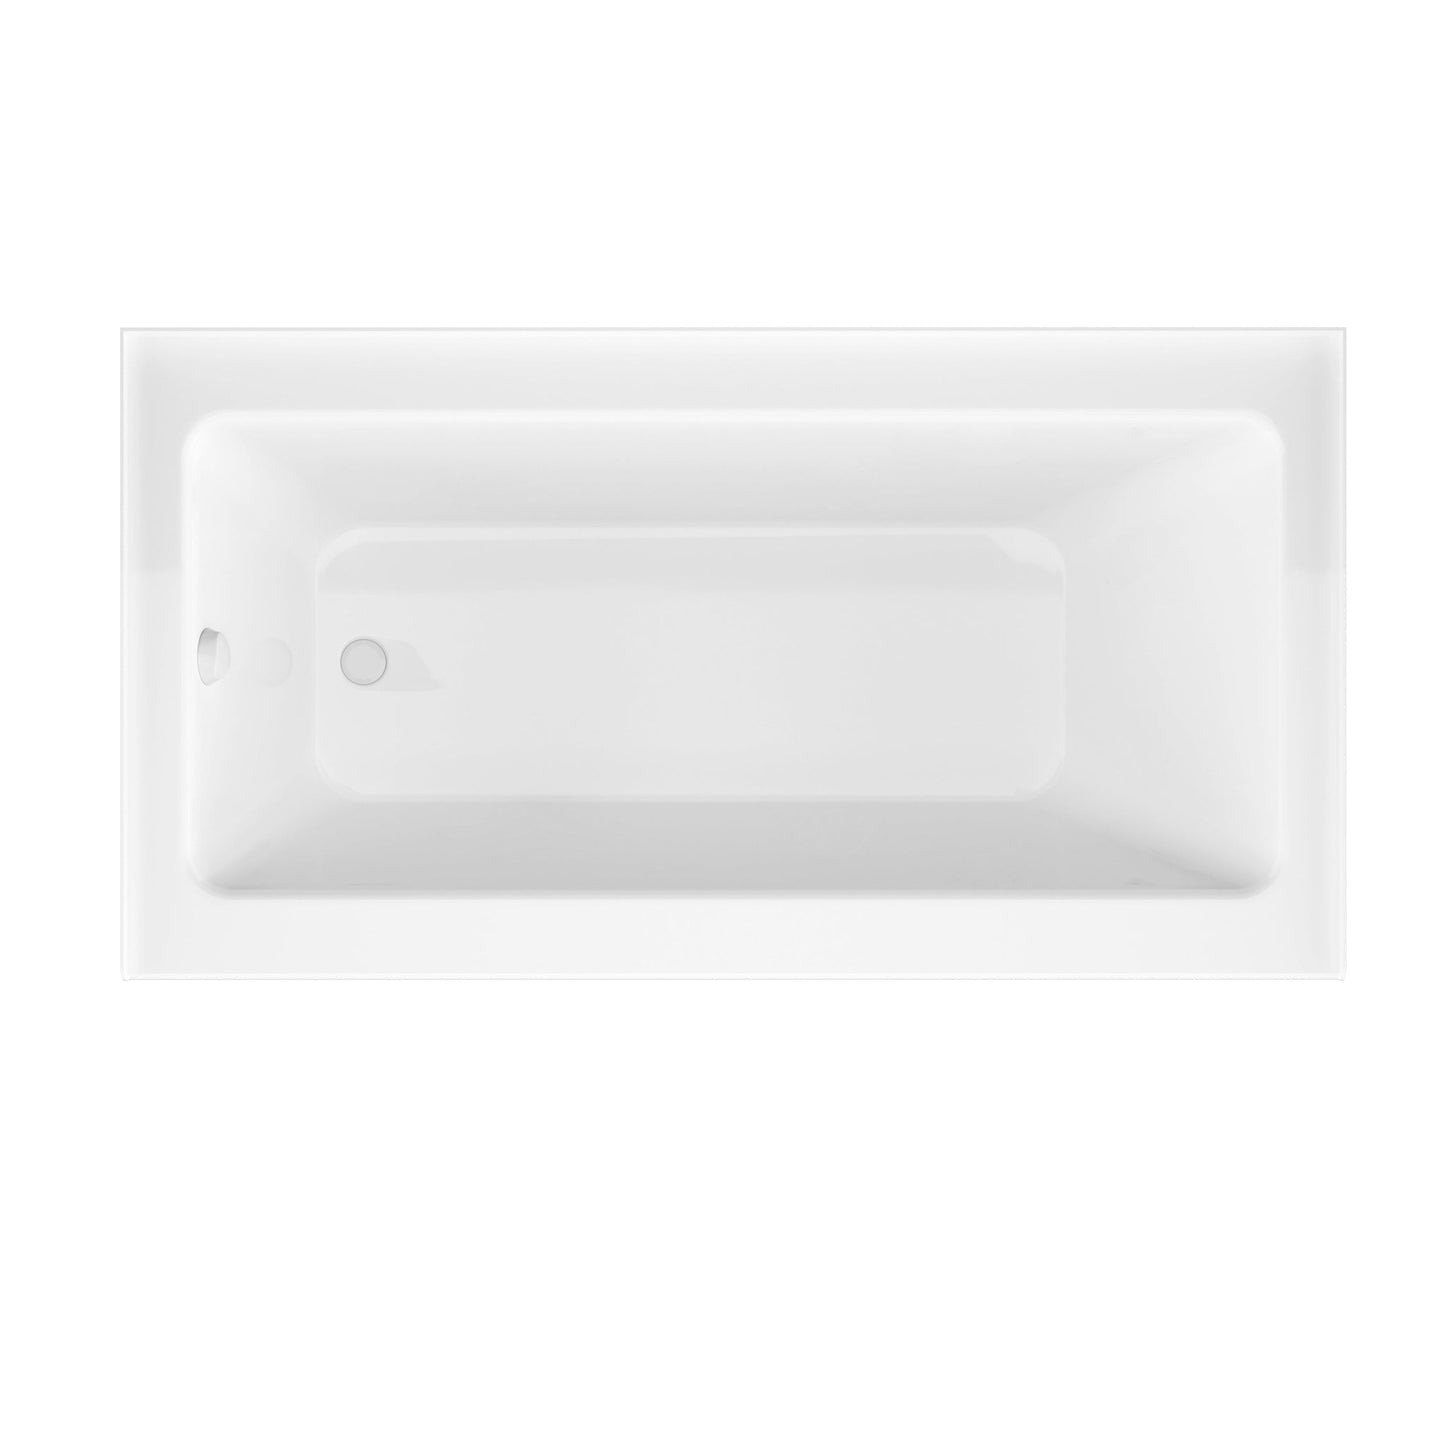 ANZZI Myth Series White "60 x 30" Alcove Left Drain Rectangular Bathtub With Built-In Flange and Frameless Brushed Nickel Hinged Door